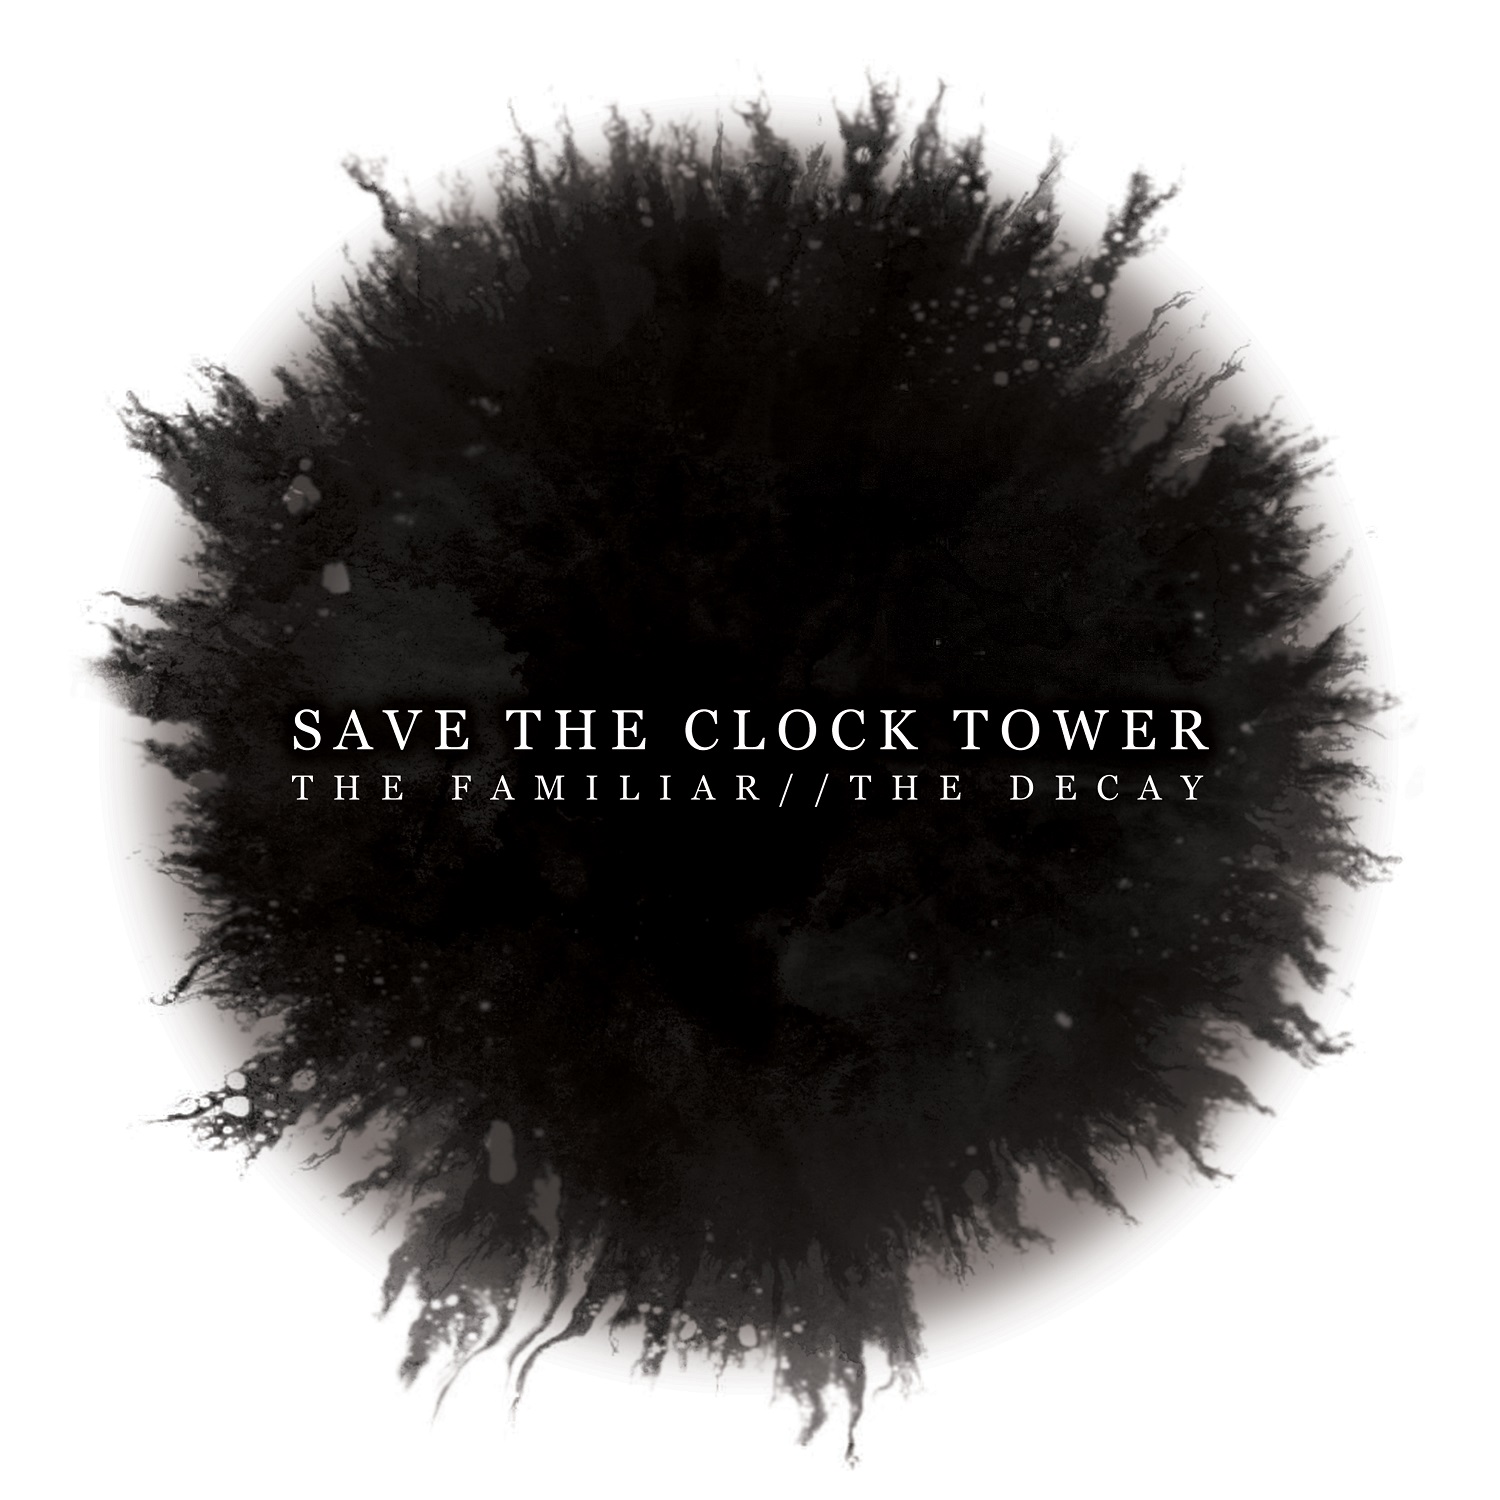 Save The Clock Tower - The Familiar // The Decay (2016) Album Info